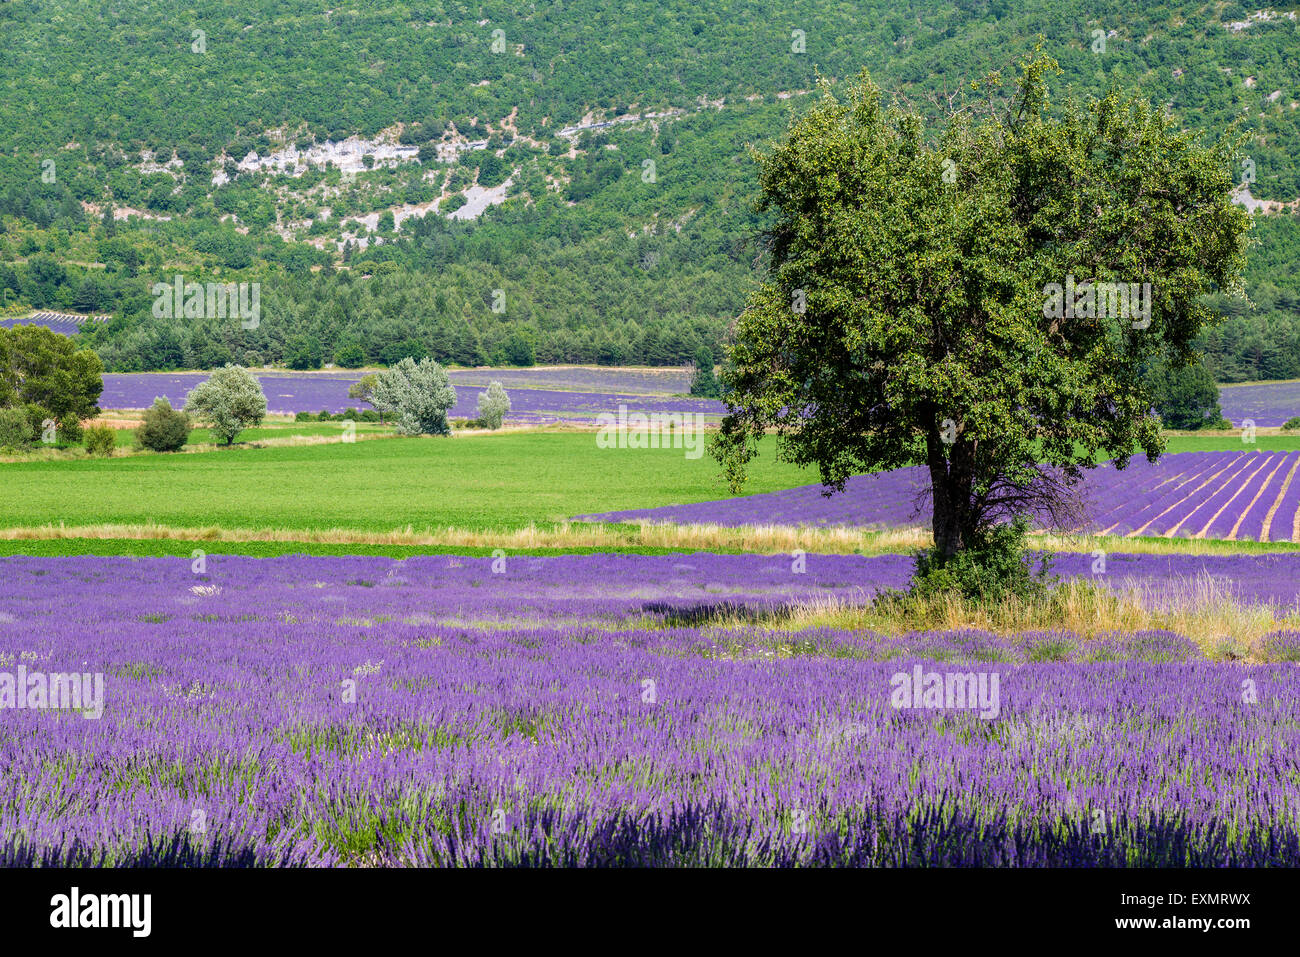 Lavender fields in bloom, Provence, France Stock Photo